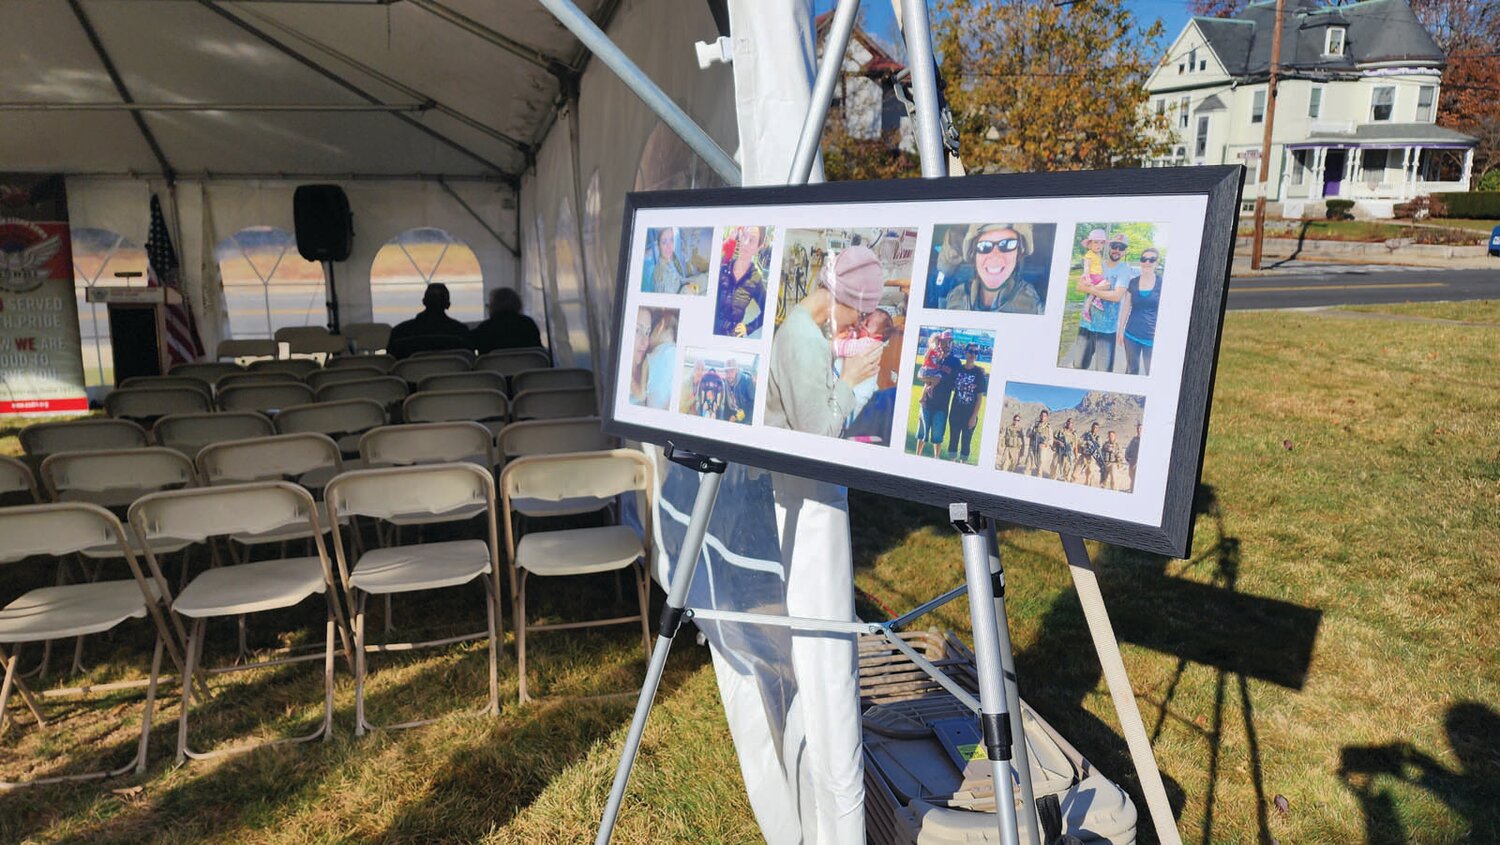 LOST TOO SOON: Attendees were welcomed with a collage of photos of Andrea T. Ryder. Ryder died in 2020 at the age of 34 from service-connected cancer. (Photo courtesy OSDRI)